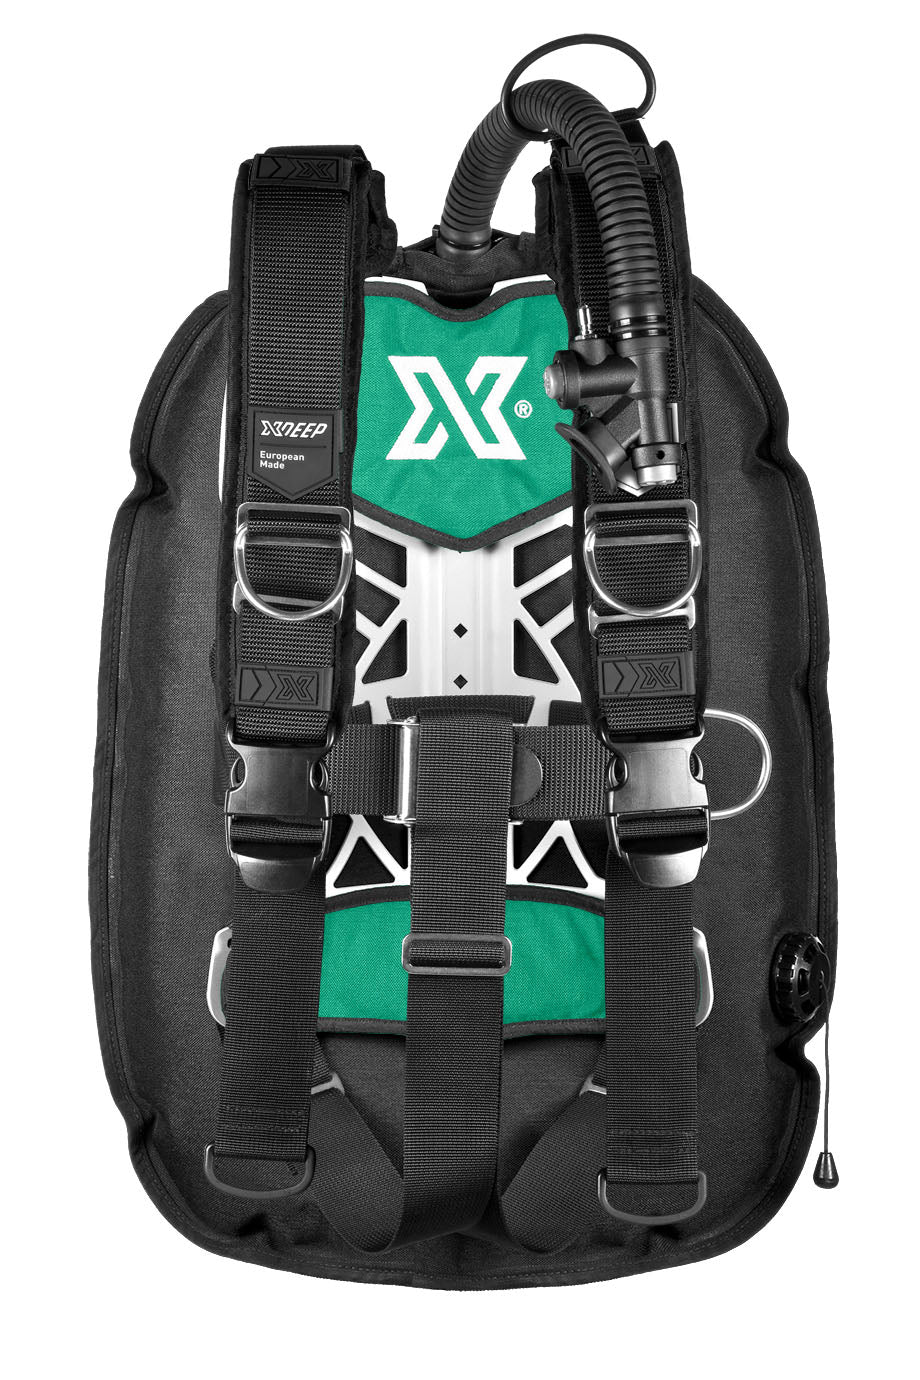 XDEEP XDEEP GHOST Full Setup with Standard or Deluxe harness Sea / Deluxe / Small - Oyster Diving